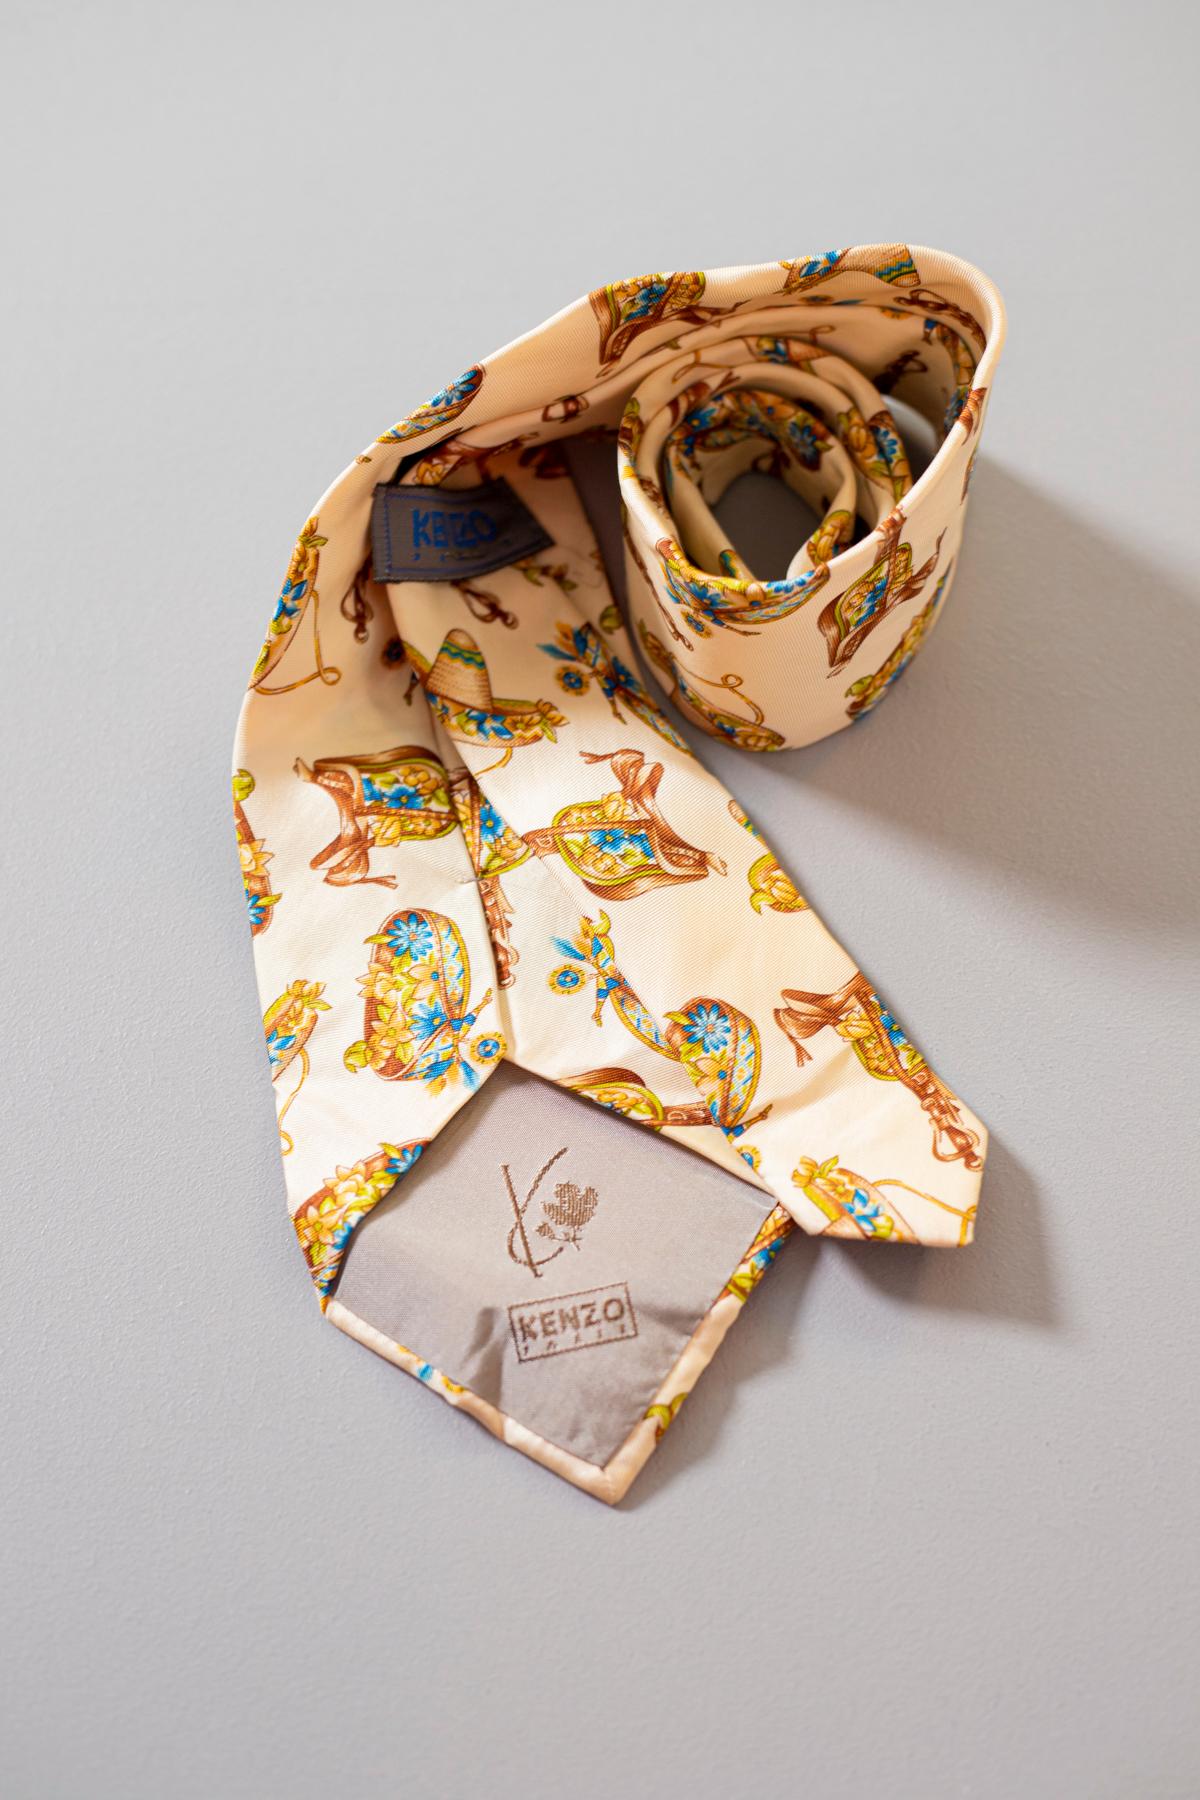 Particular and bizarre, this tie designed by Kenzo, is made of silk. Decorated with particular designs, including sombreros, on a light beige background. This accessory is perfect for a person with a particular and extravagant character and look,